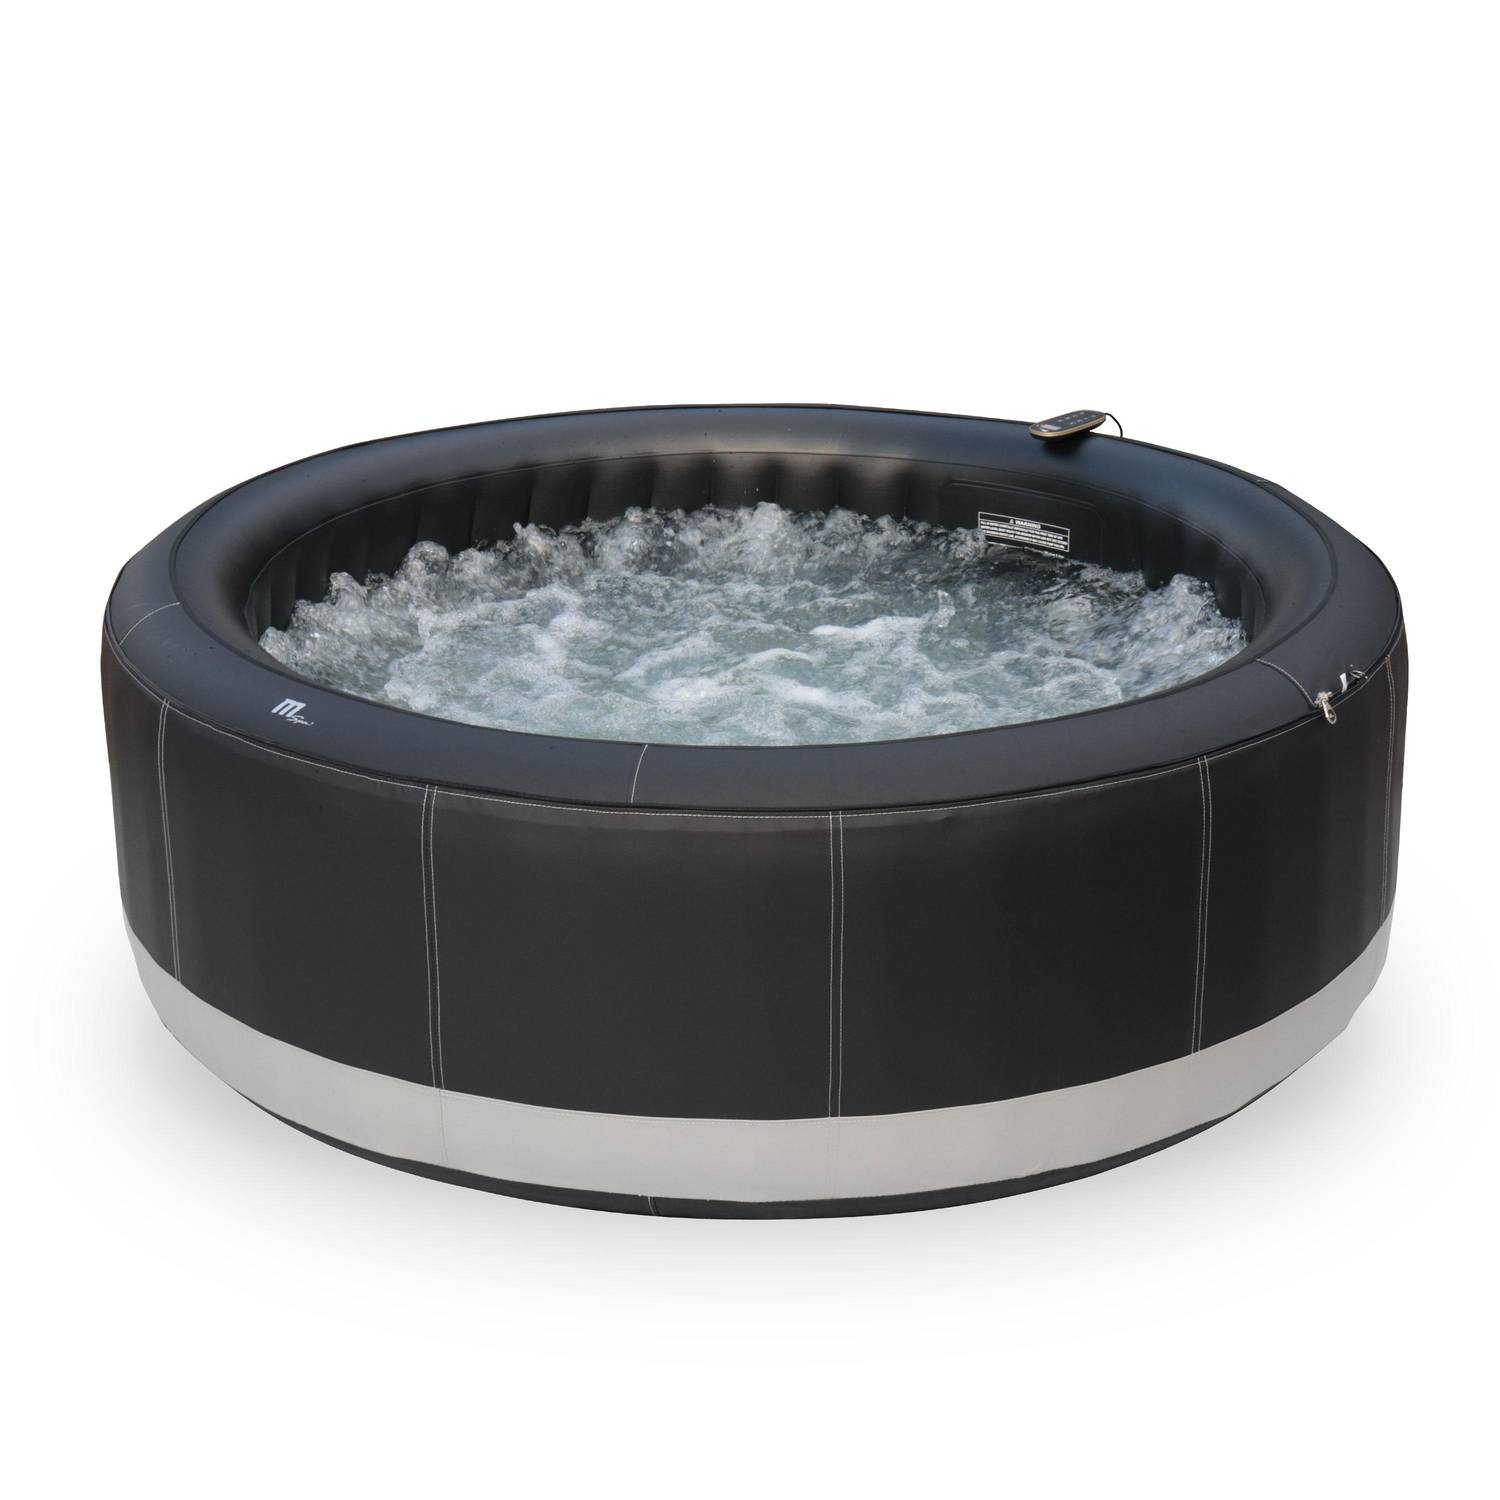  6-person premium round inflatable hot tub MSpa - Ø205cm round 6-person spa, leather effect, pump, heater, inflation, filter, cover and padlock - Camaro 6 - Balck  Photo1